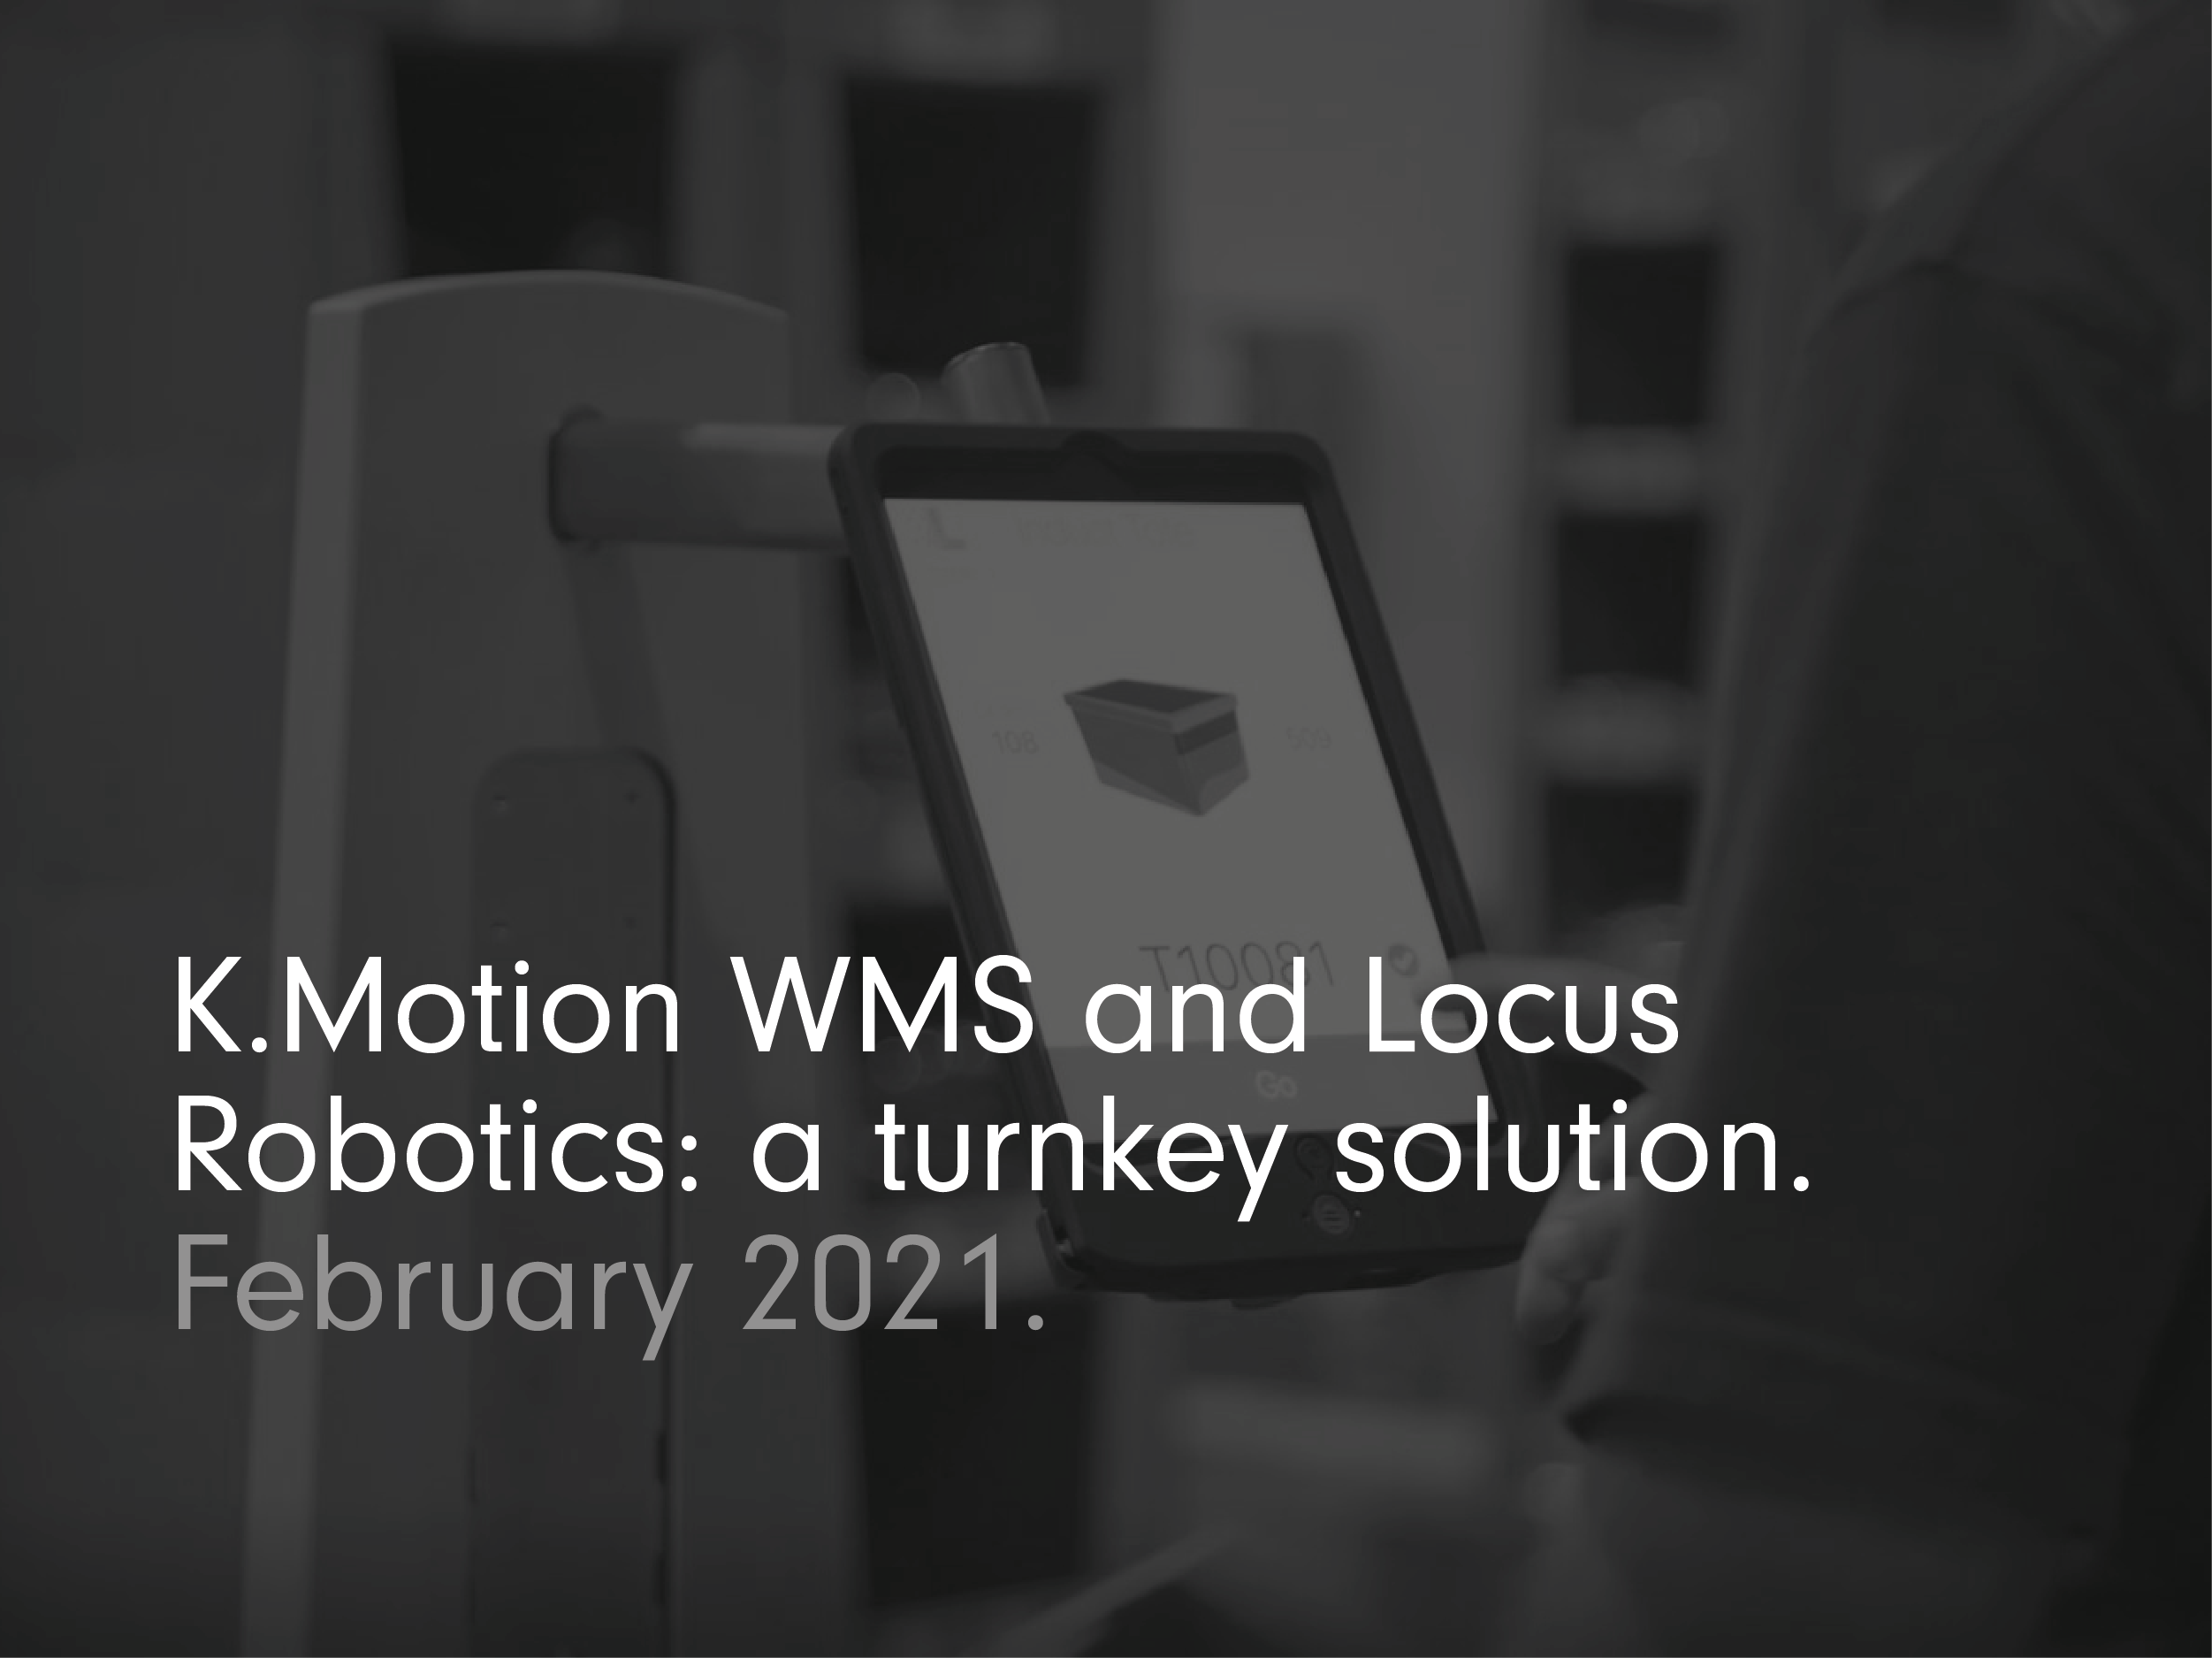 Implementing robots in the warehouse need not be difficult. In fact, it is incredibly easy if you choose the right supplier. Robots from Locus Robotics are a turnkey solution for anyone already running K.Motion WMS (previously HighJump WMS and Accellos WMS). LocusBots are fully compatible with these systems, having been purposefully designed to integrate seamlessly with them. Locus Robotics provides a complete solution, with everything you need to get started. So, you don’t need to worry about your server being compatible nor do you have to source specific hardware or firmware. Here’s what you get with this ready to go solution.